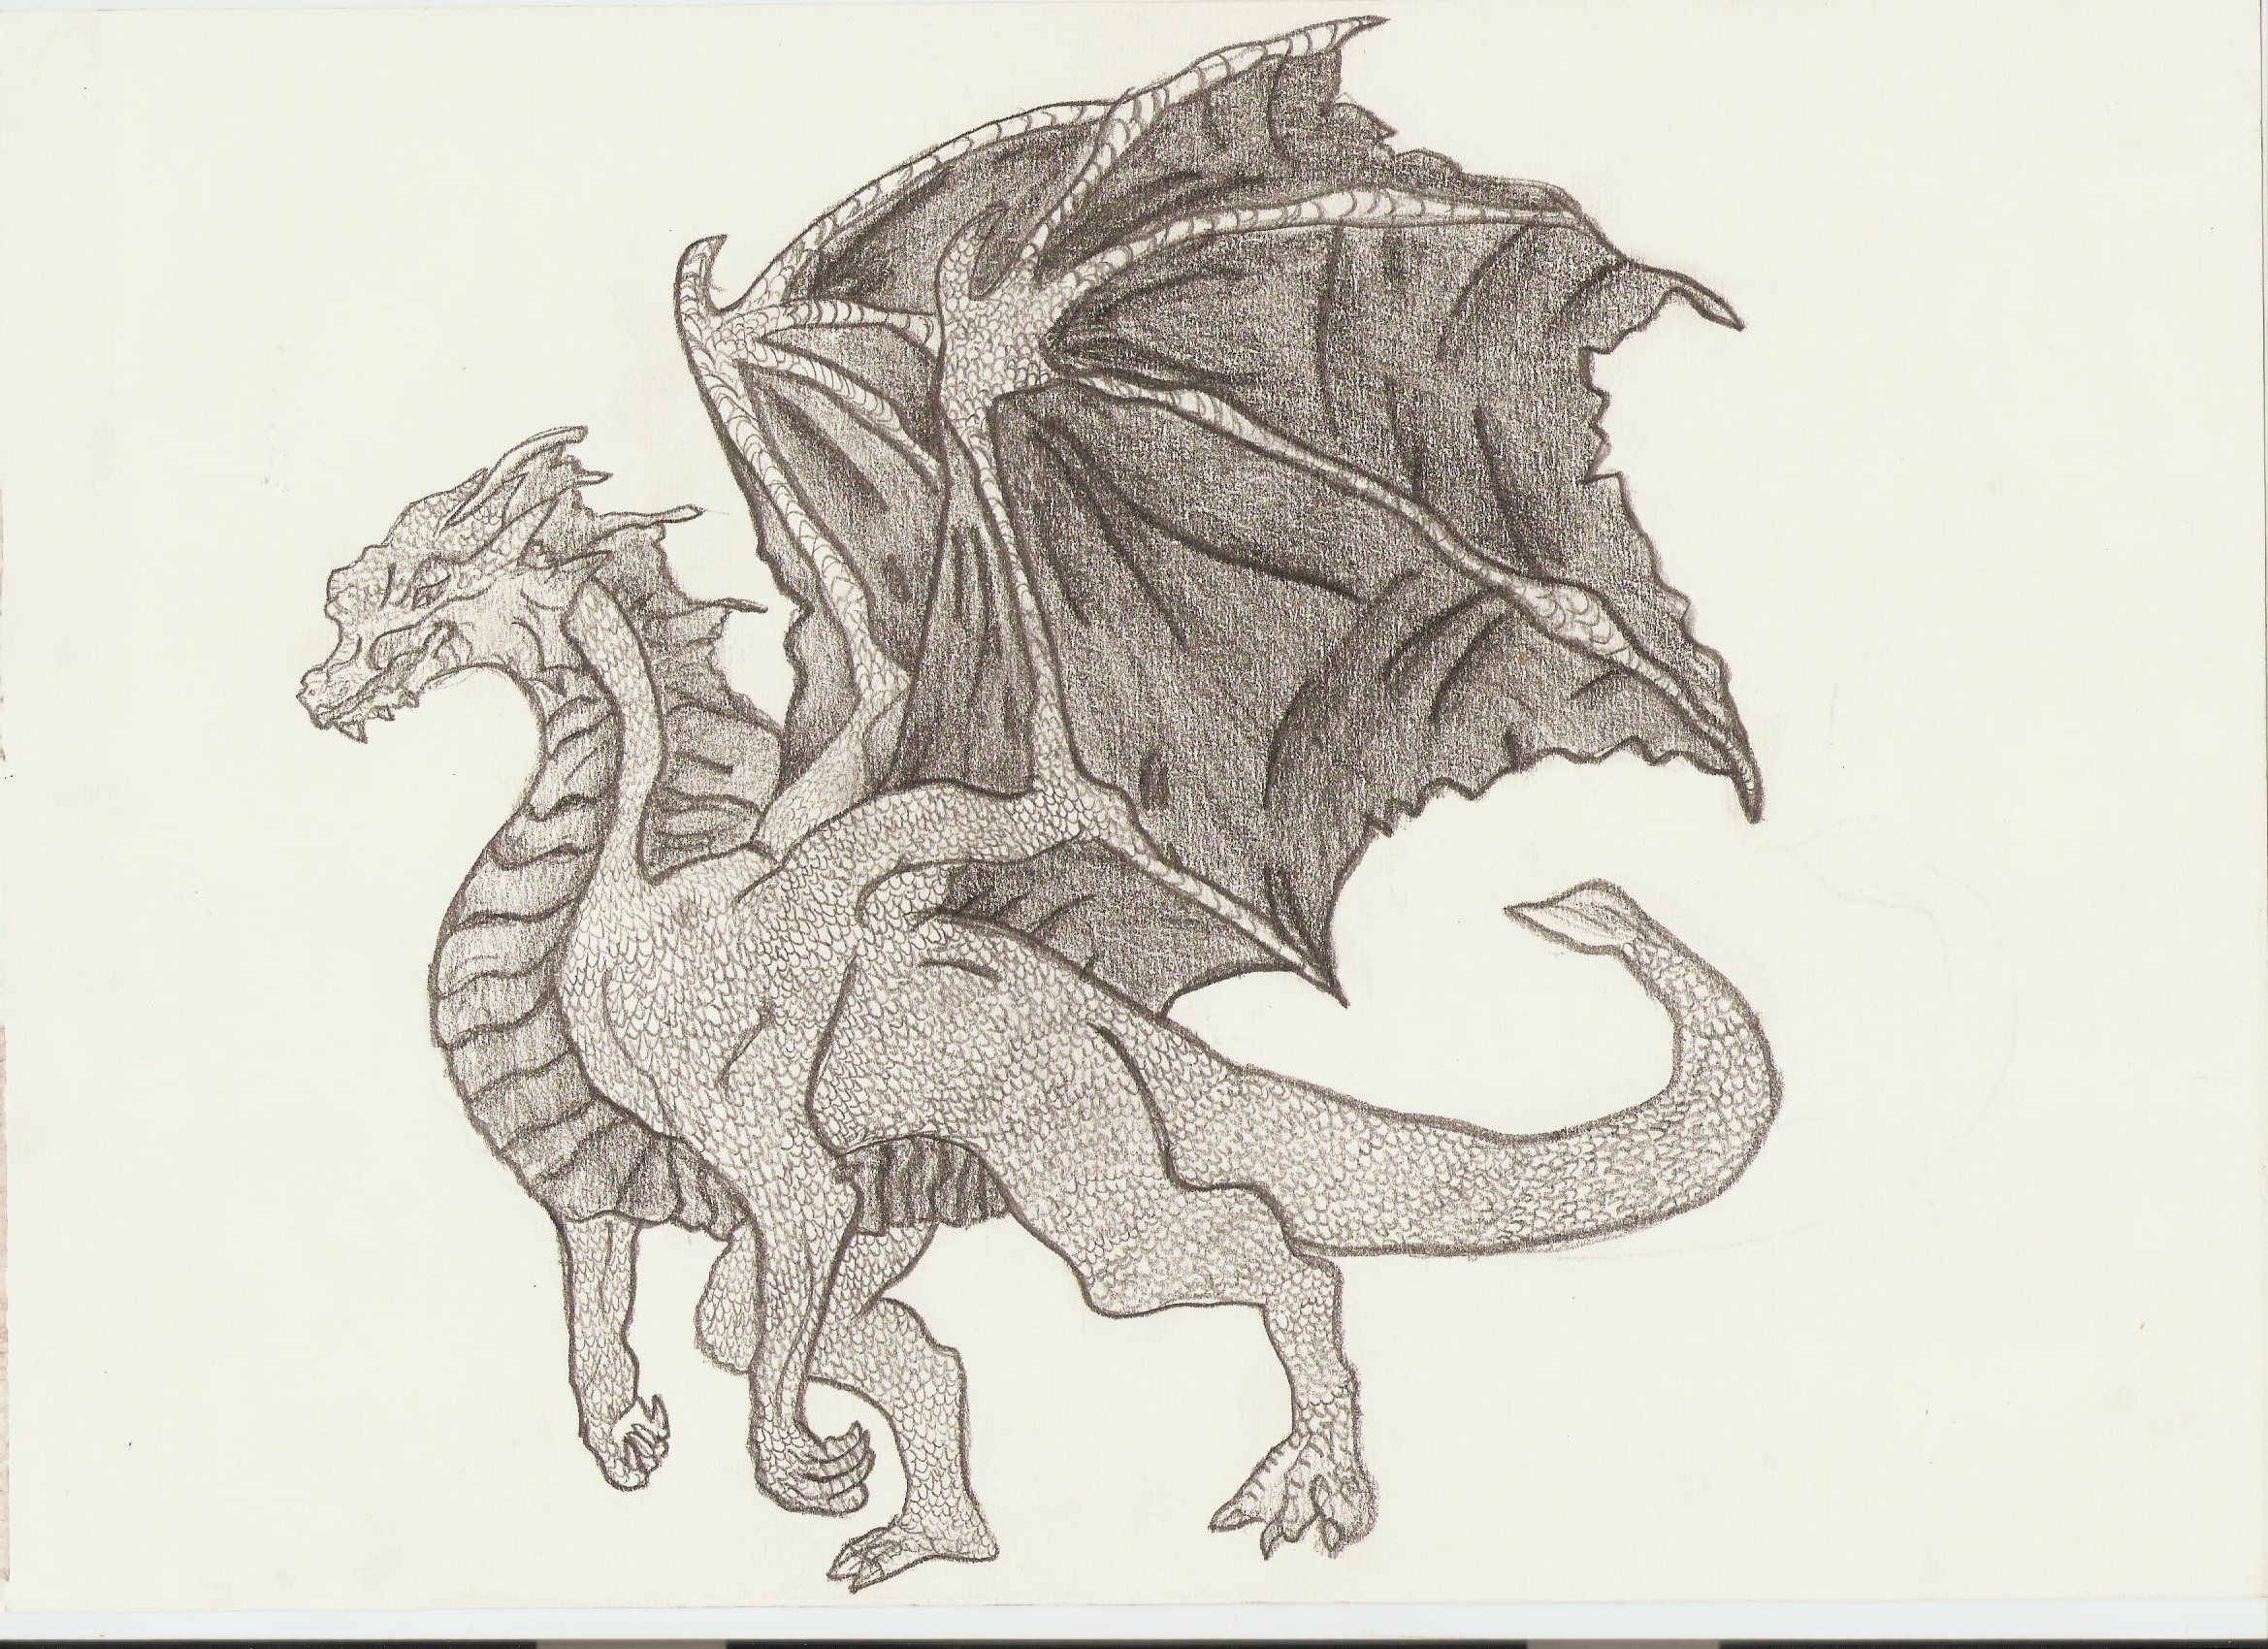 Cool Dragon Drawings Full Body / Full Body Dragon Drawing Easy Step By